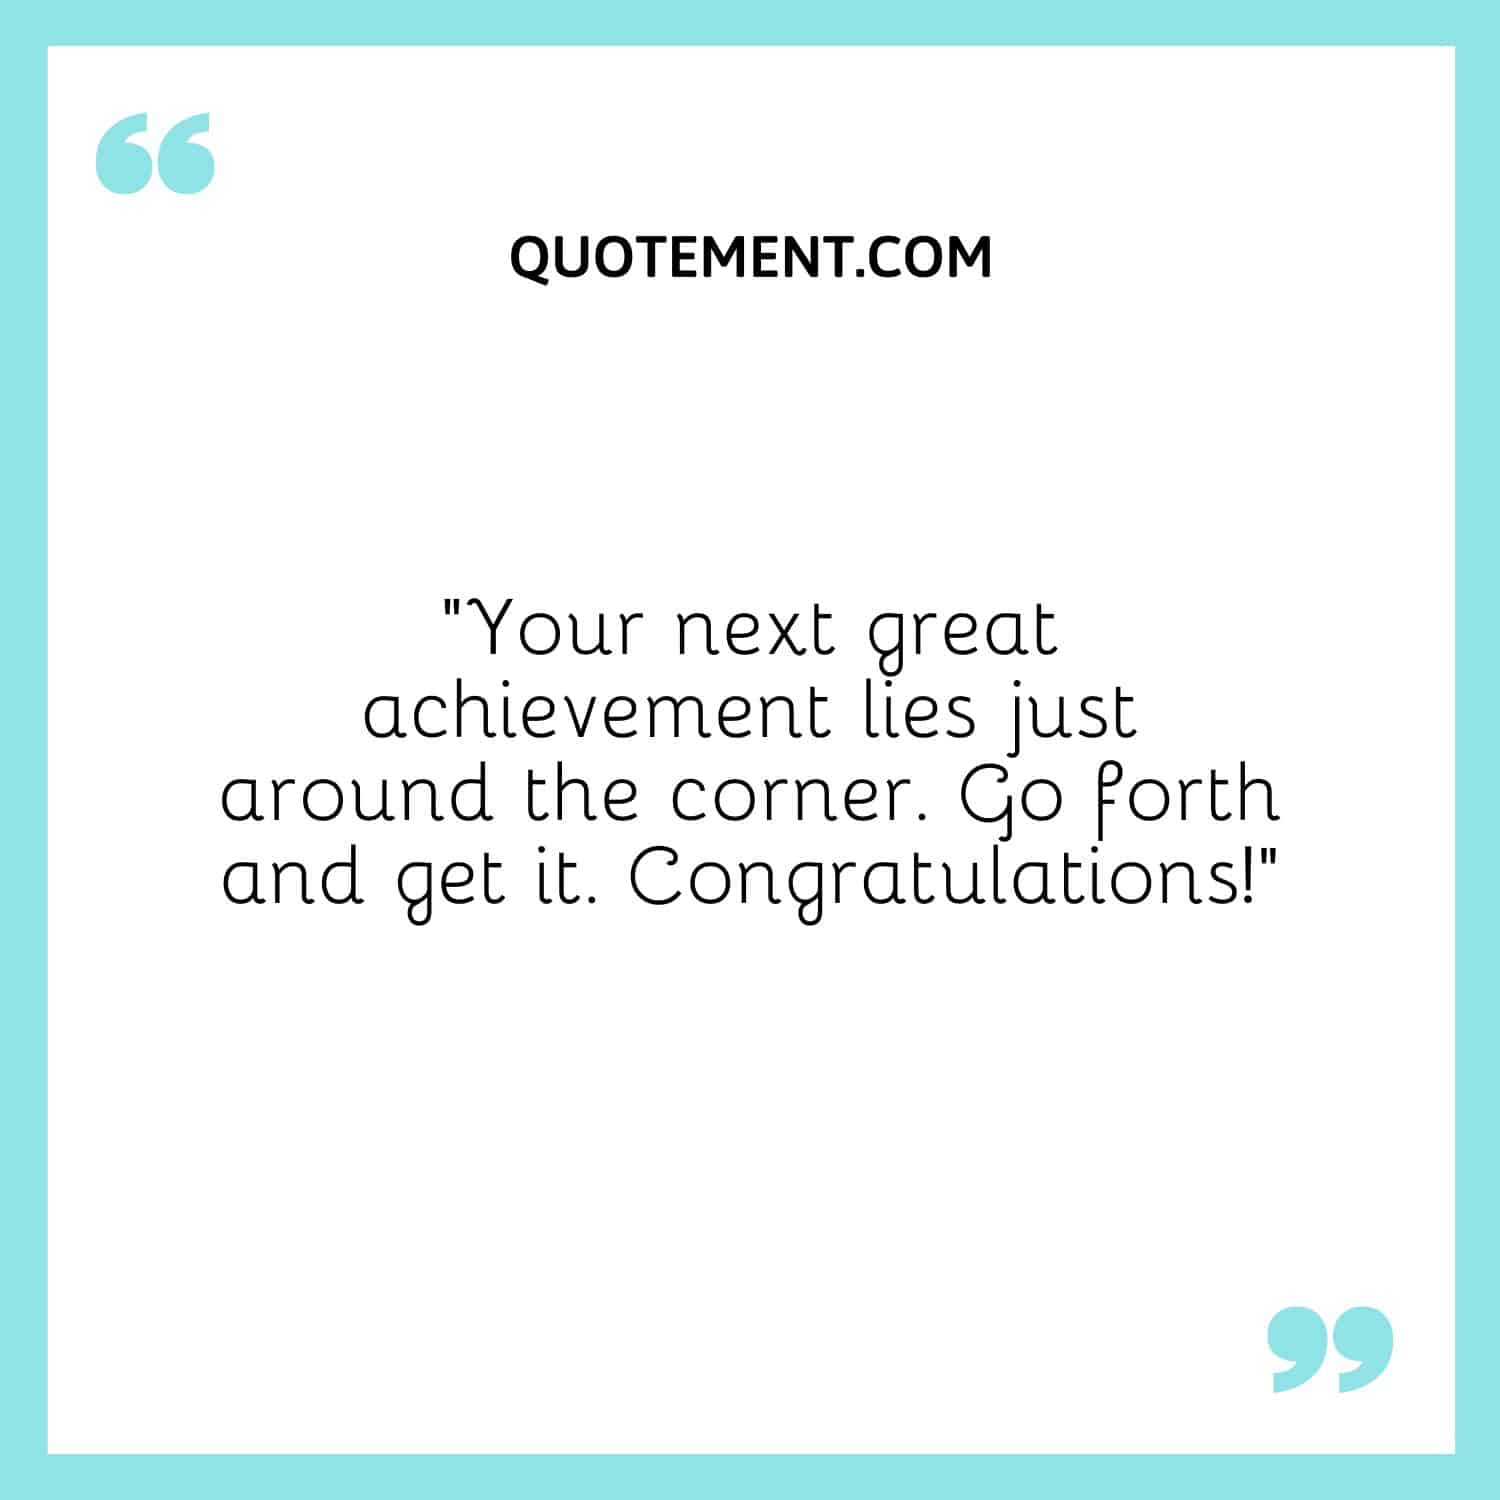 “Your next great achievement lies just around the corner. Go forth and get it. Congratulations!”